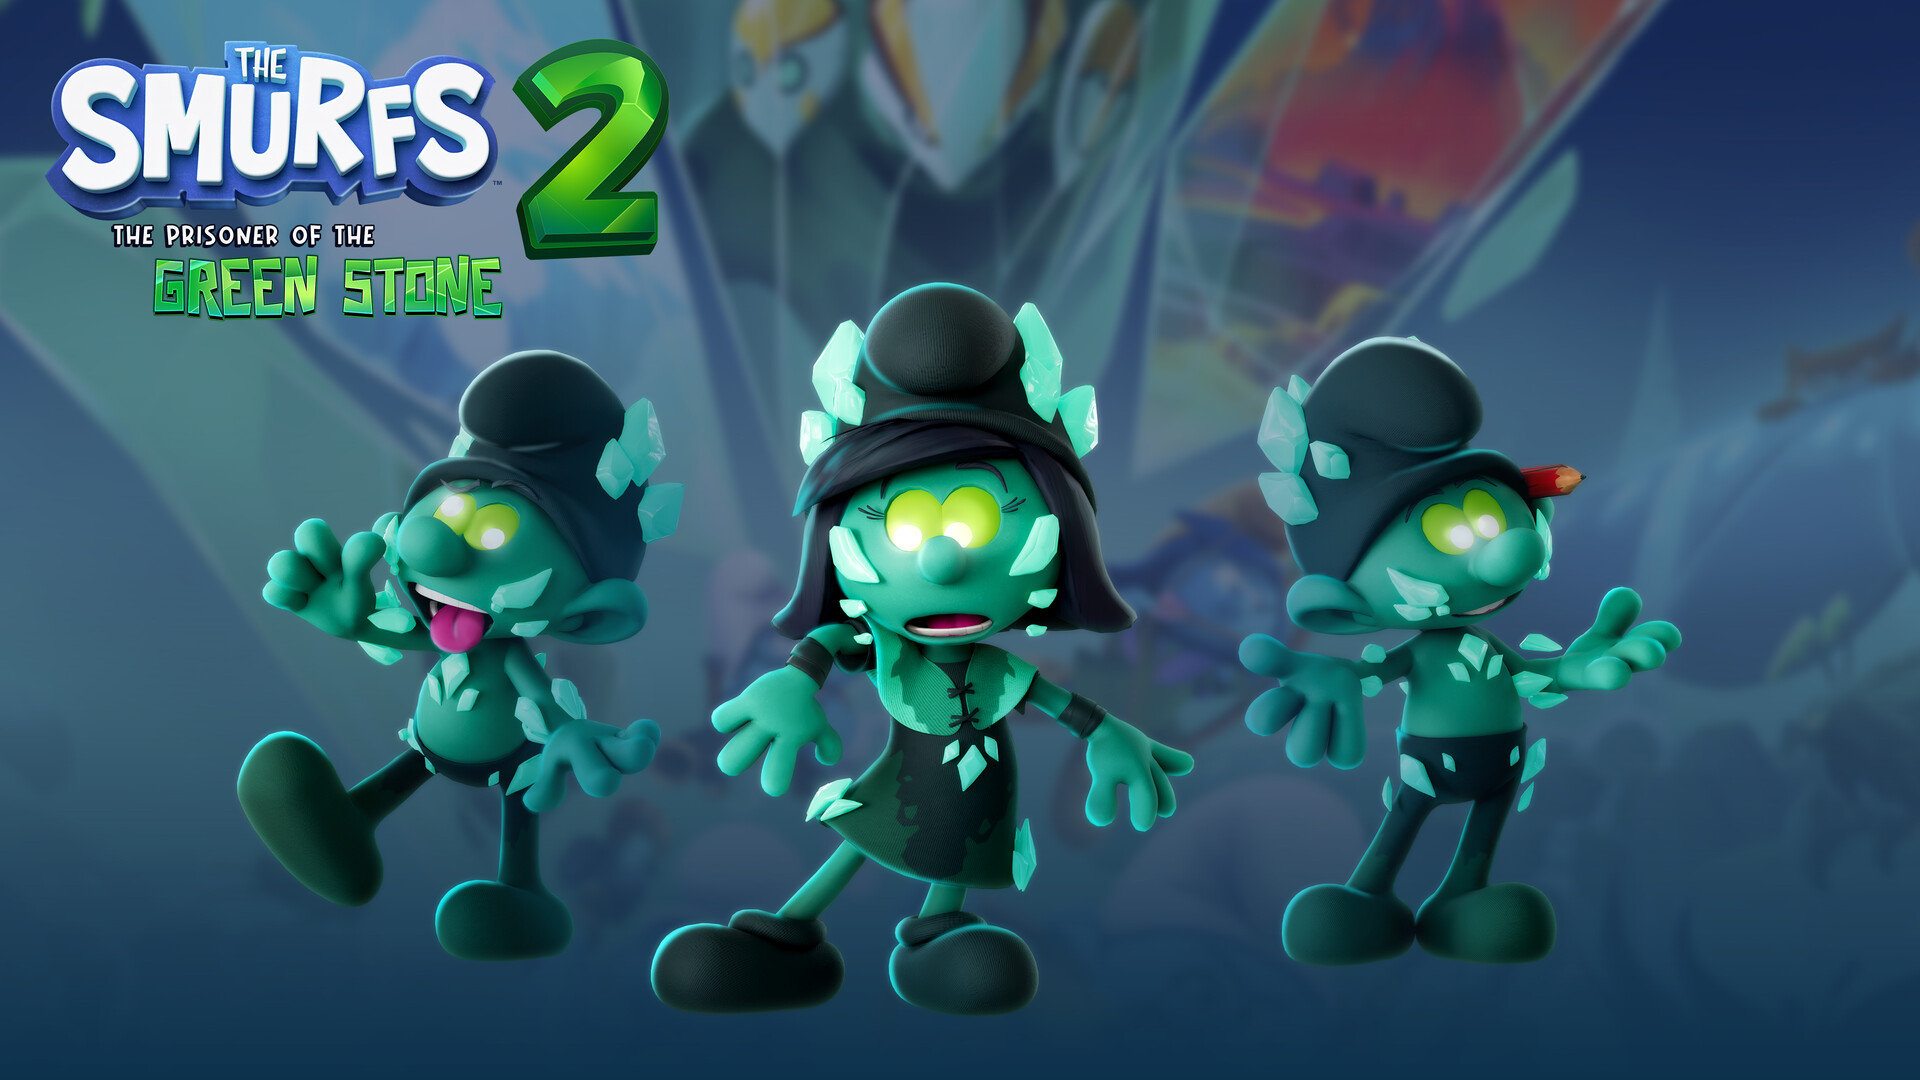 The Smurfs 2: The Prisoner of the Green Stone - Corrupted Outfit DLC GOG CD Key 1.3 usd